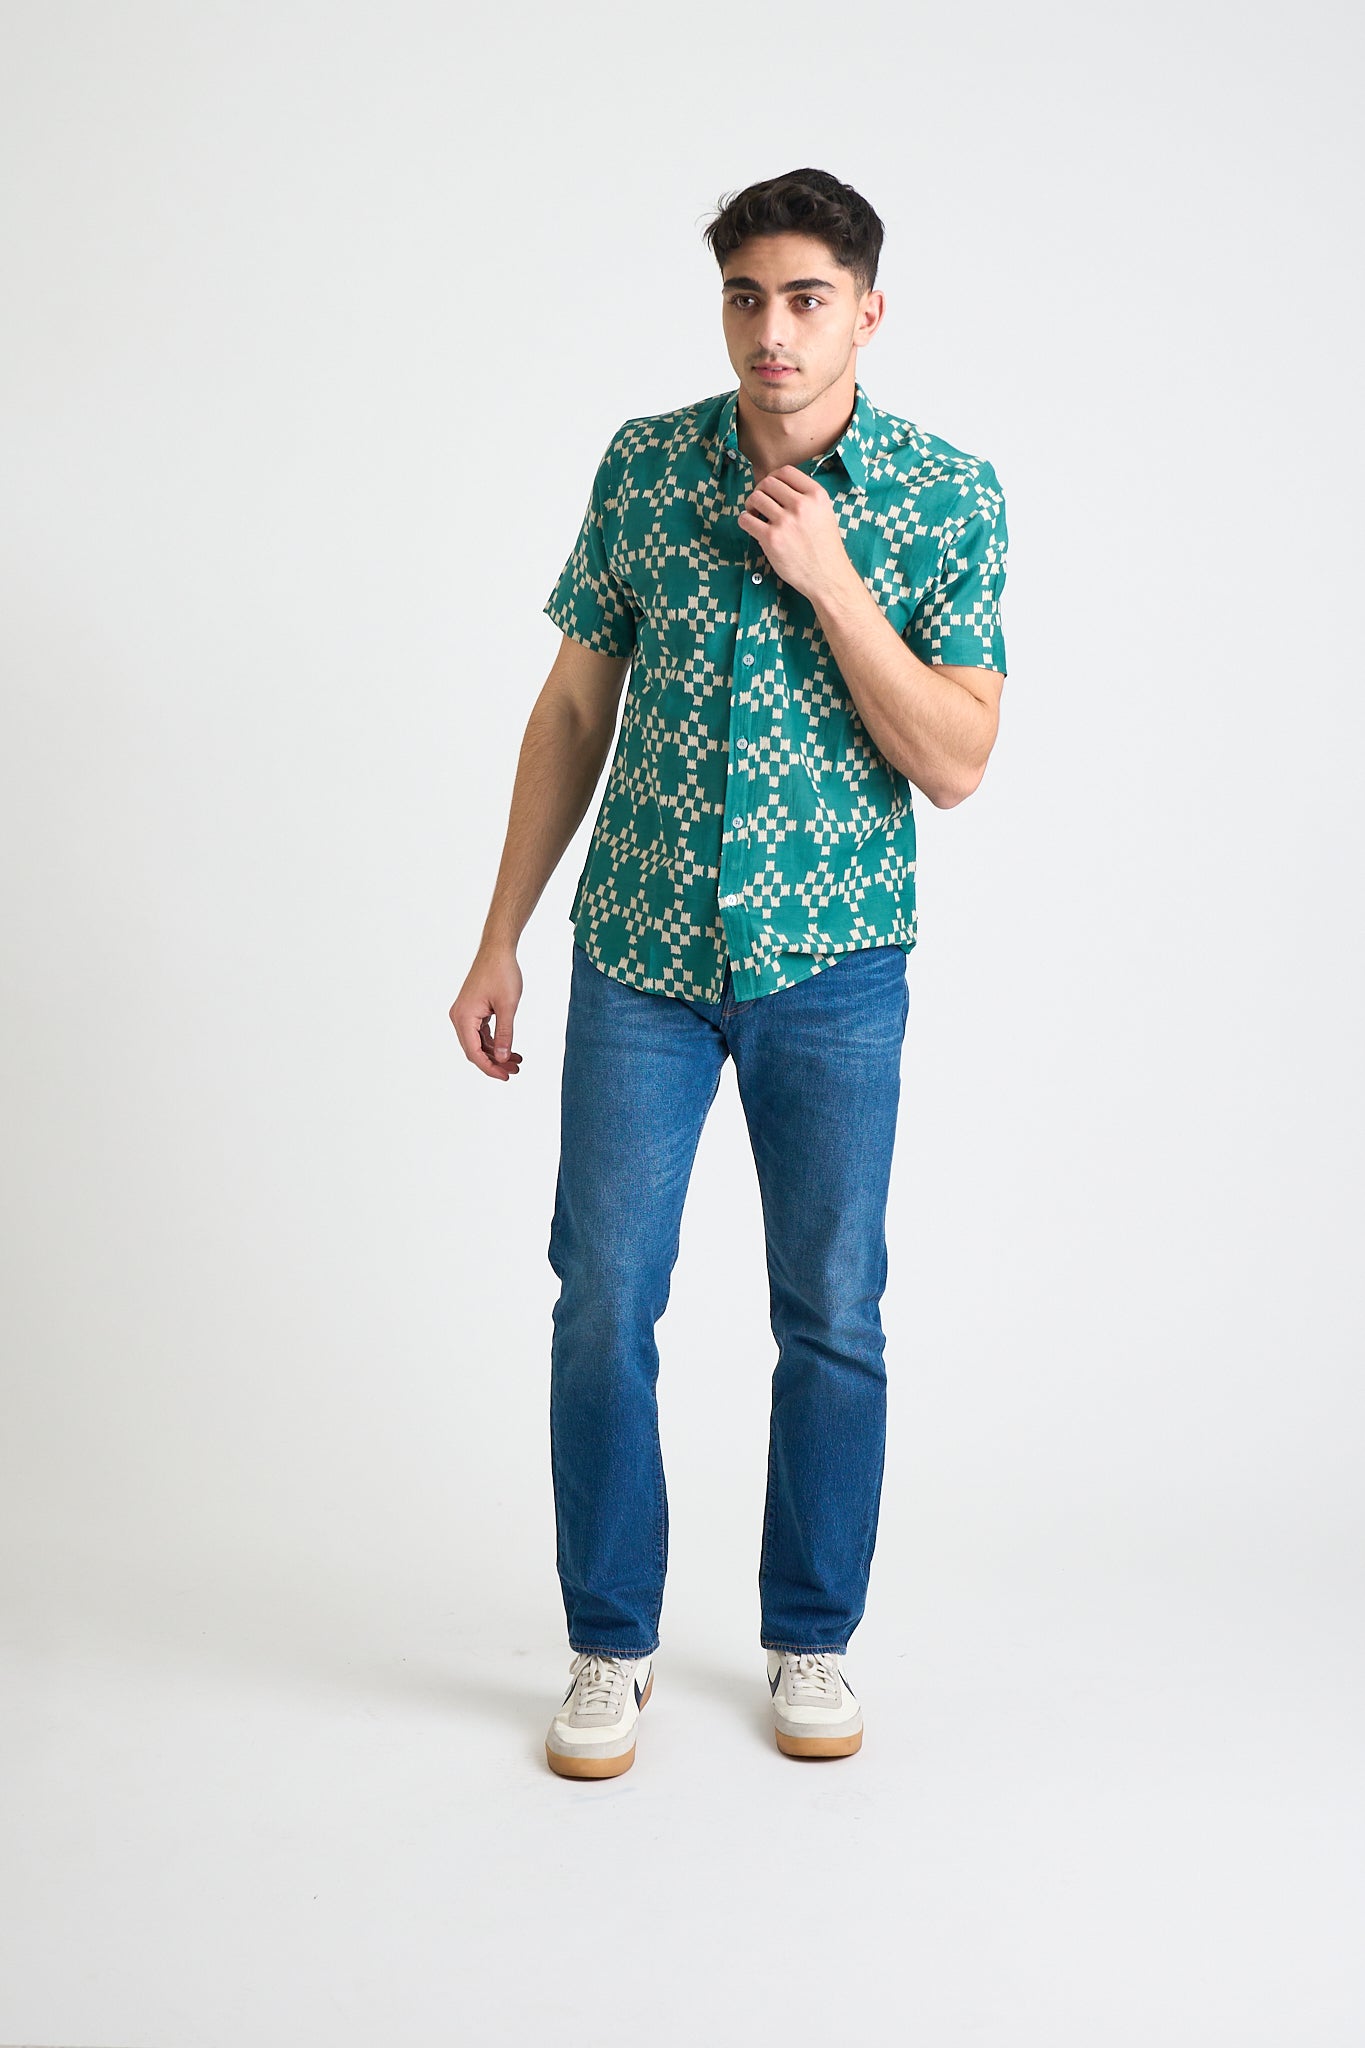 Hand Printed 'The Sheril' Short Sleeve Shirt in Green and White Squares